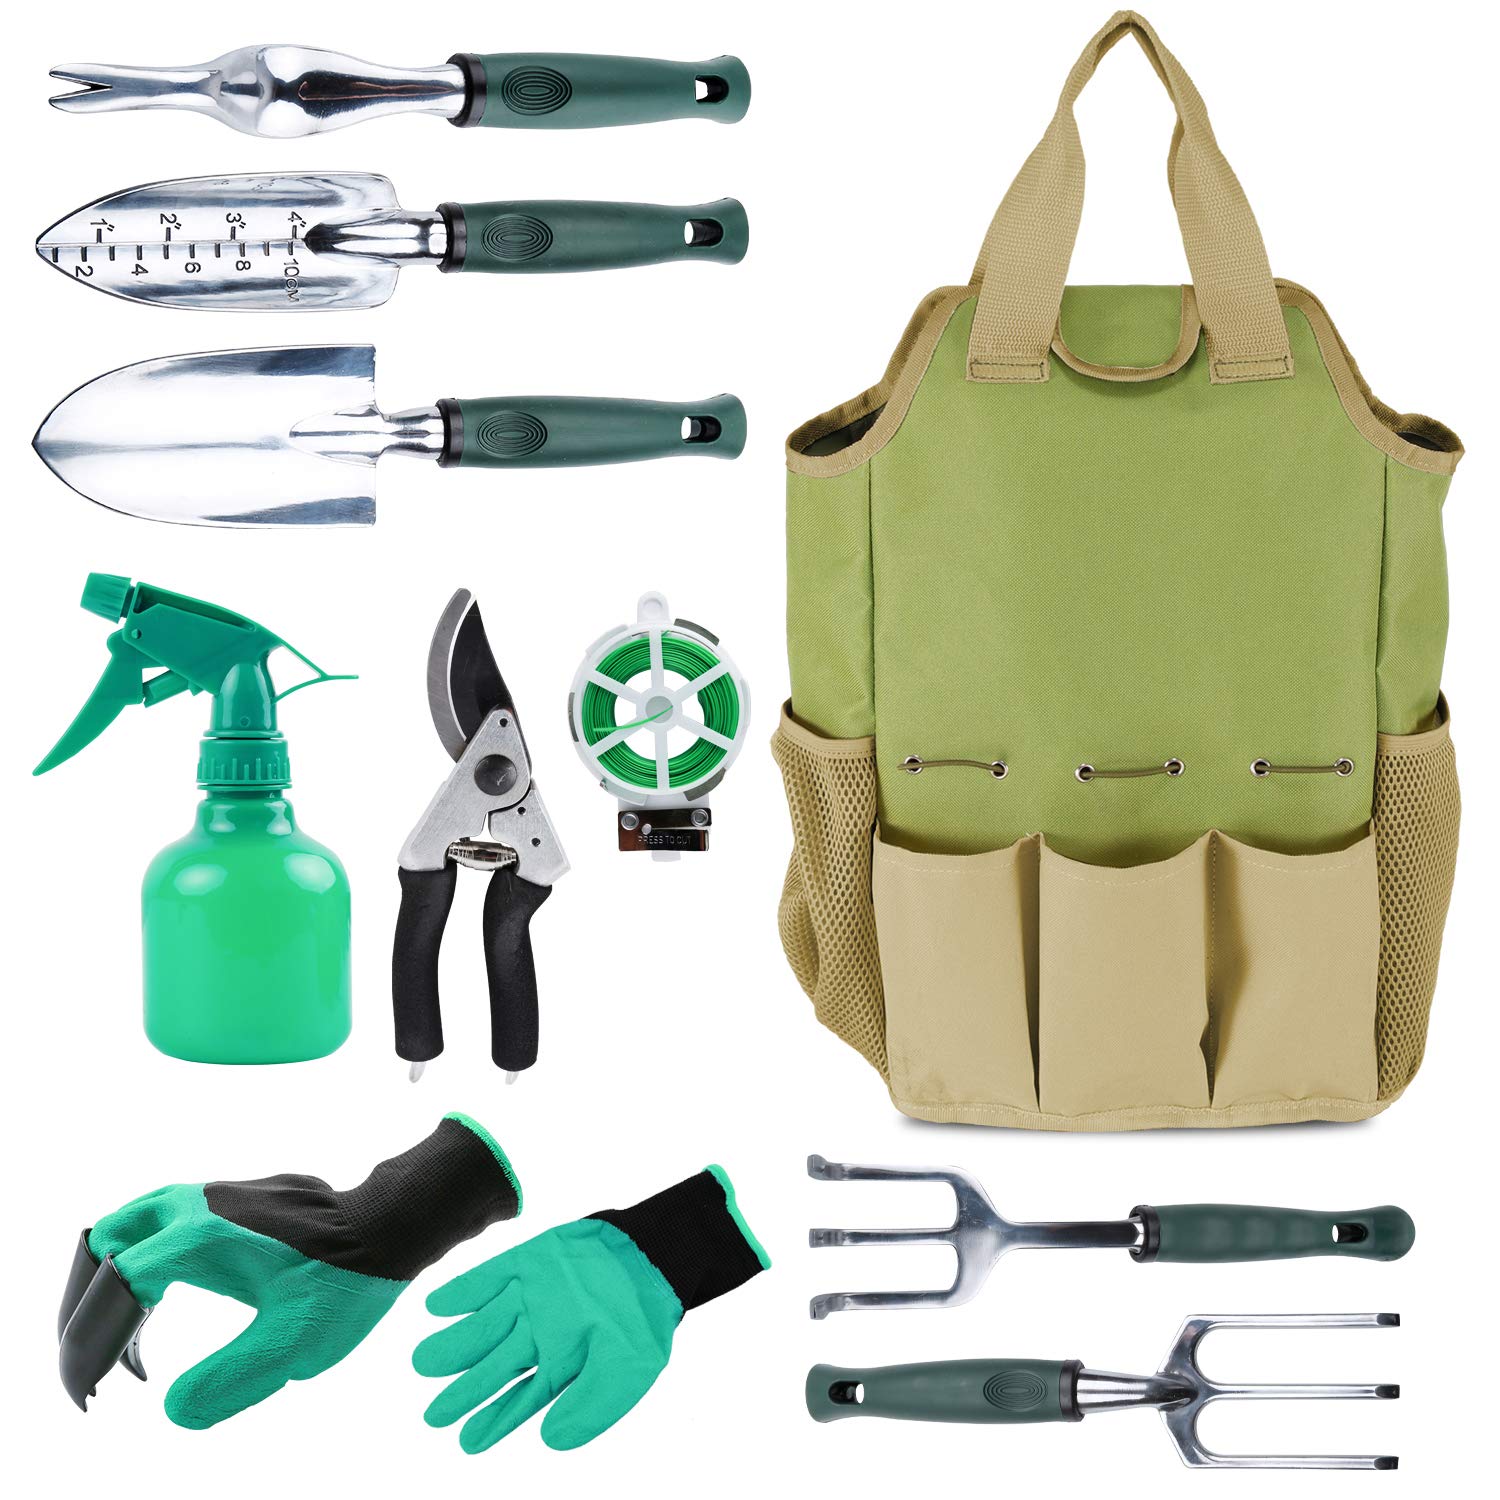 INNO STAGE Gardening Tools Set and Organizer Tote Bag